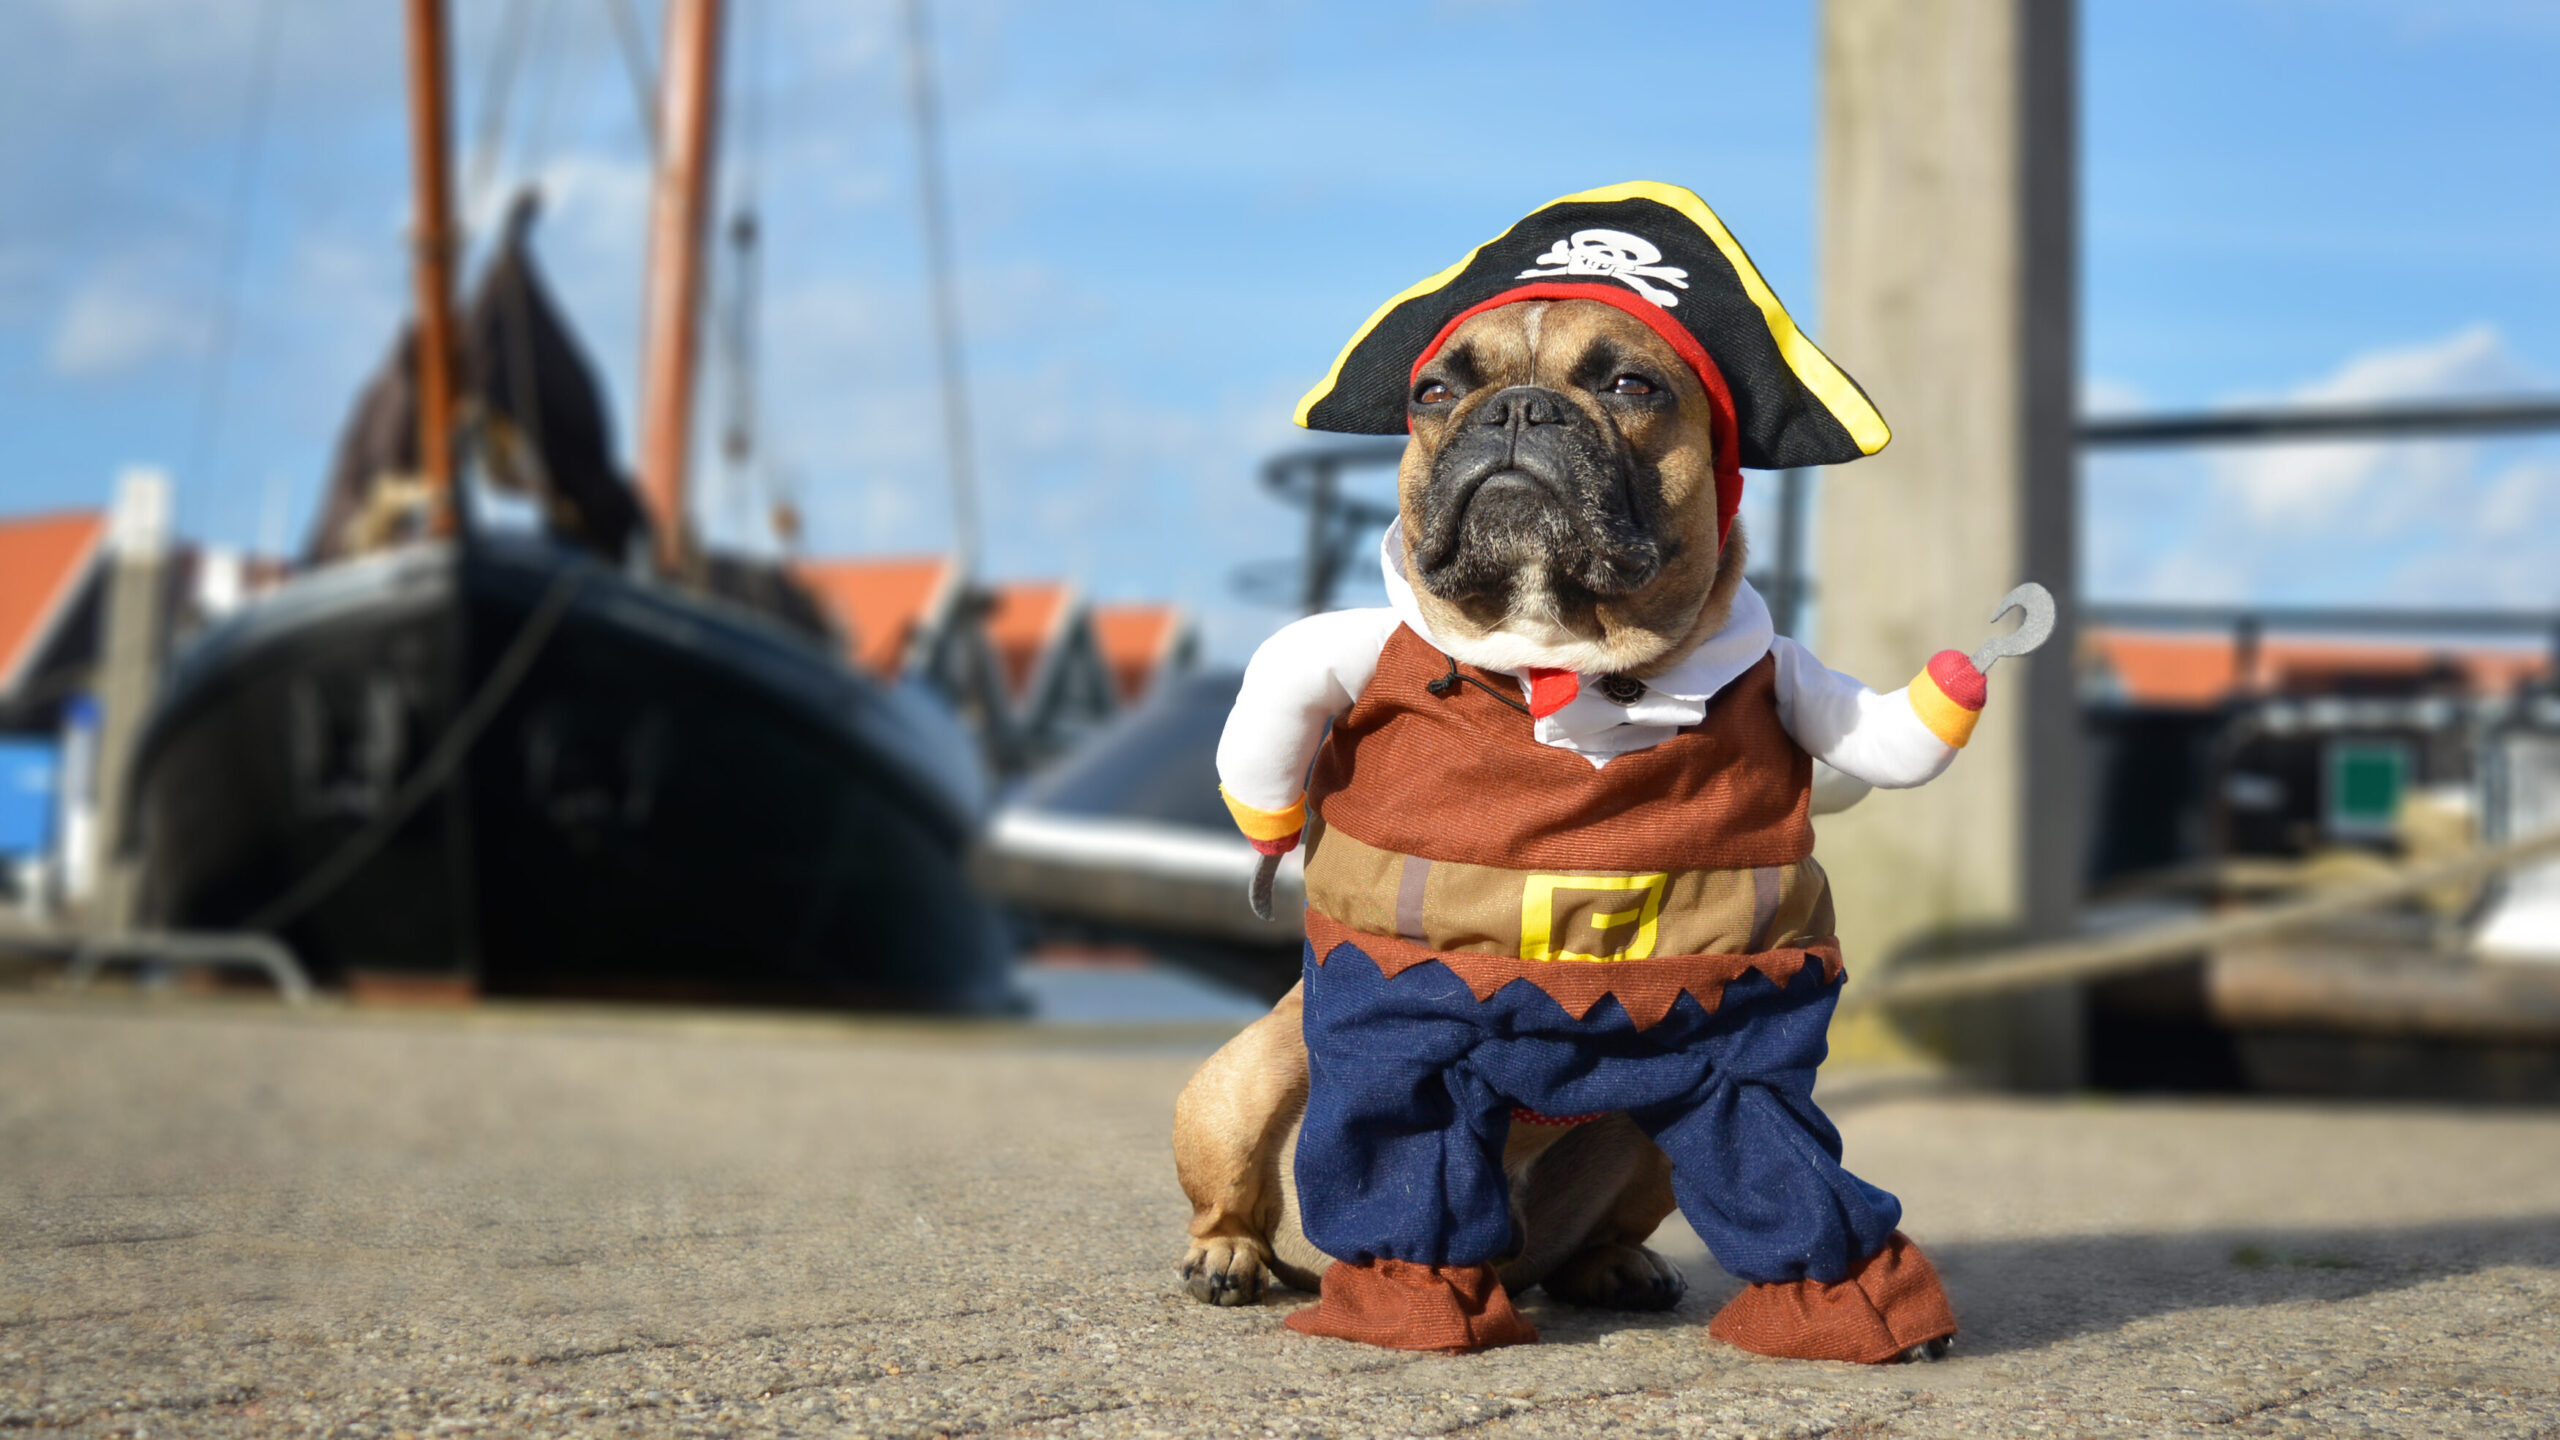 Halloween isn't just for humans anymore! Pet owners around the world have embraced the tradition of dressing up their dogs in adorable and creative costumes.